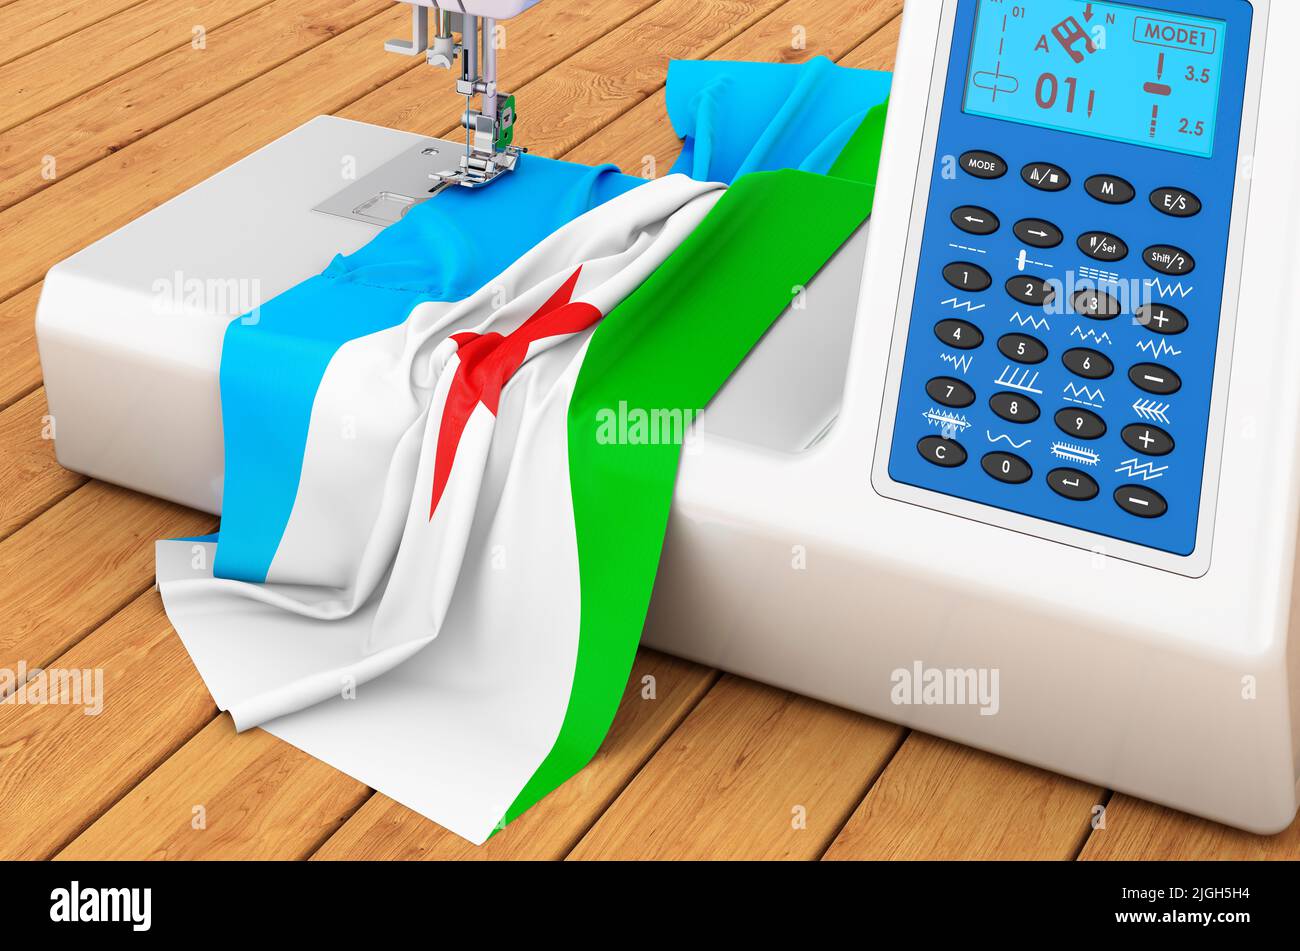 Modern sewing machine with Djiboutian flag on the wooden table. 3D rendering Stock Photo